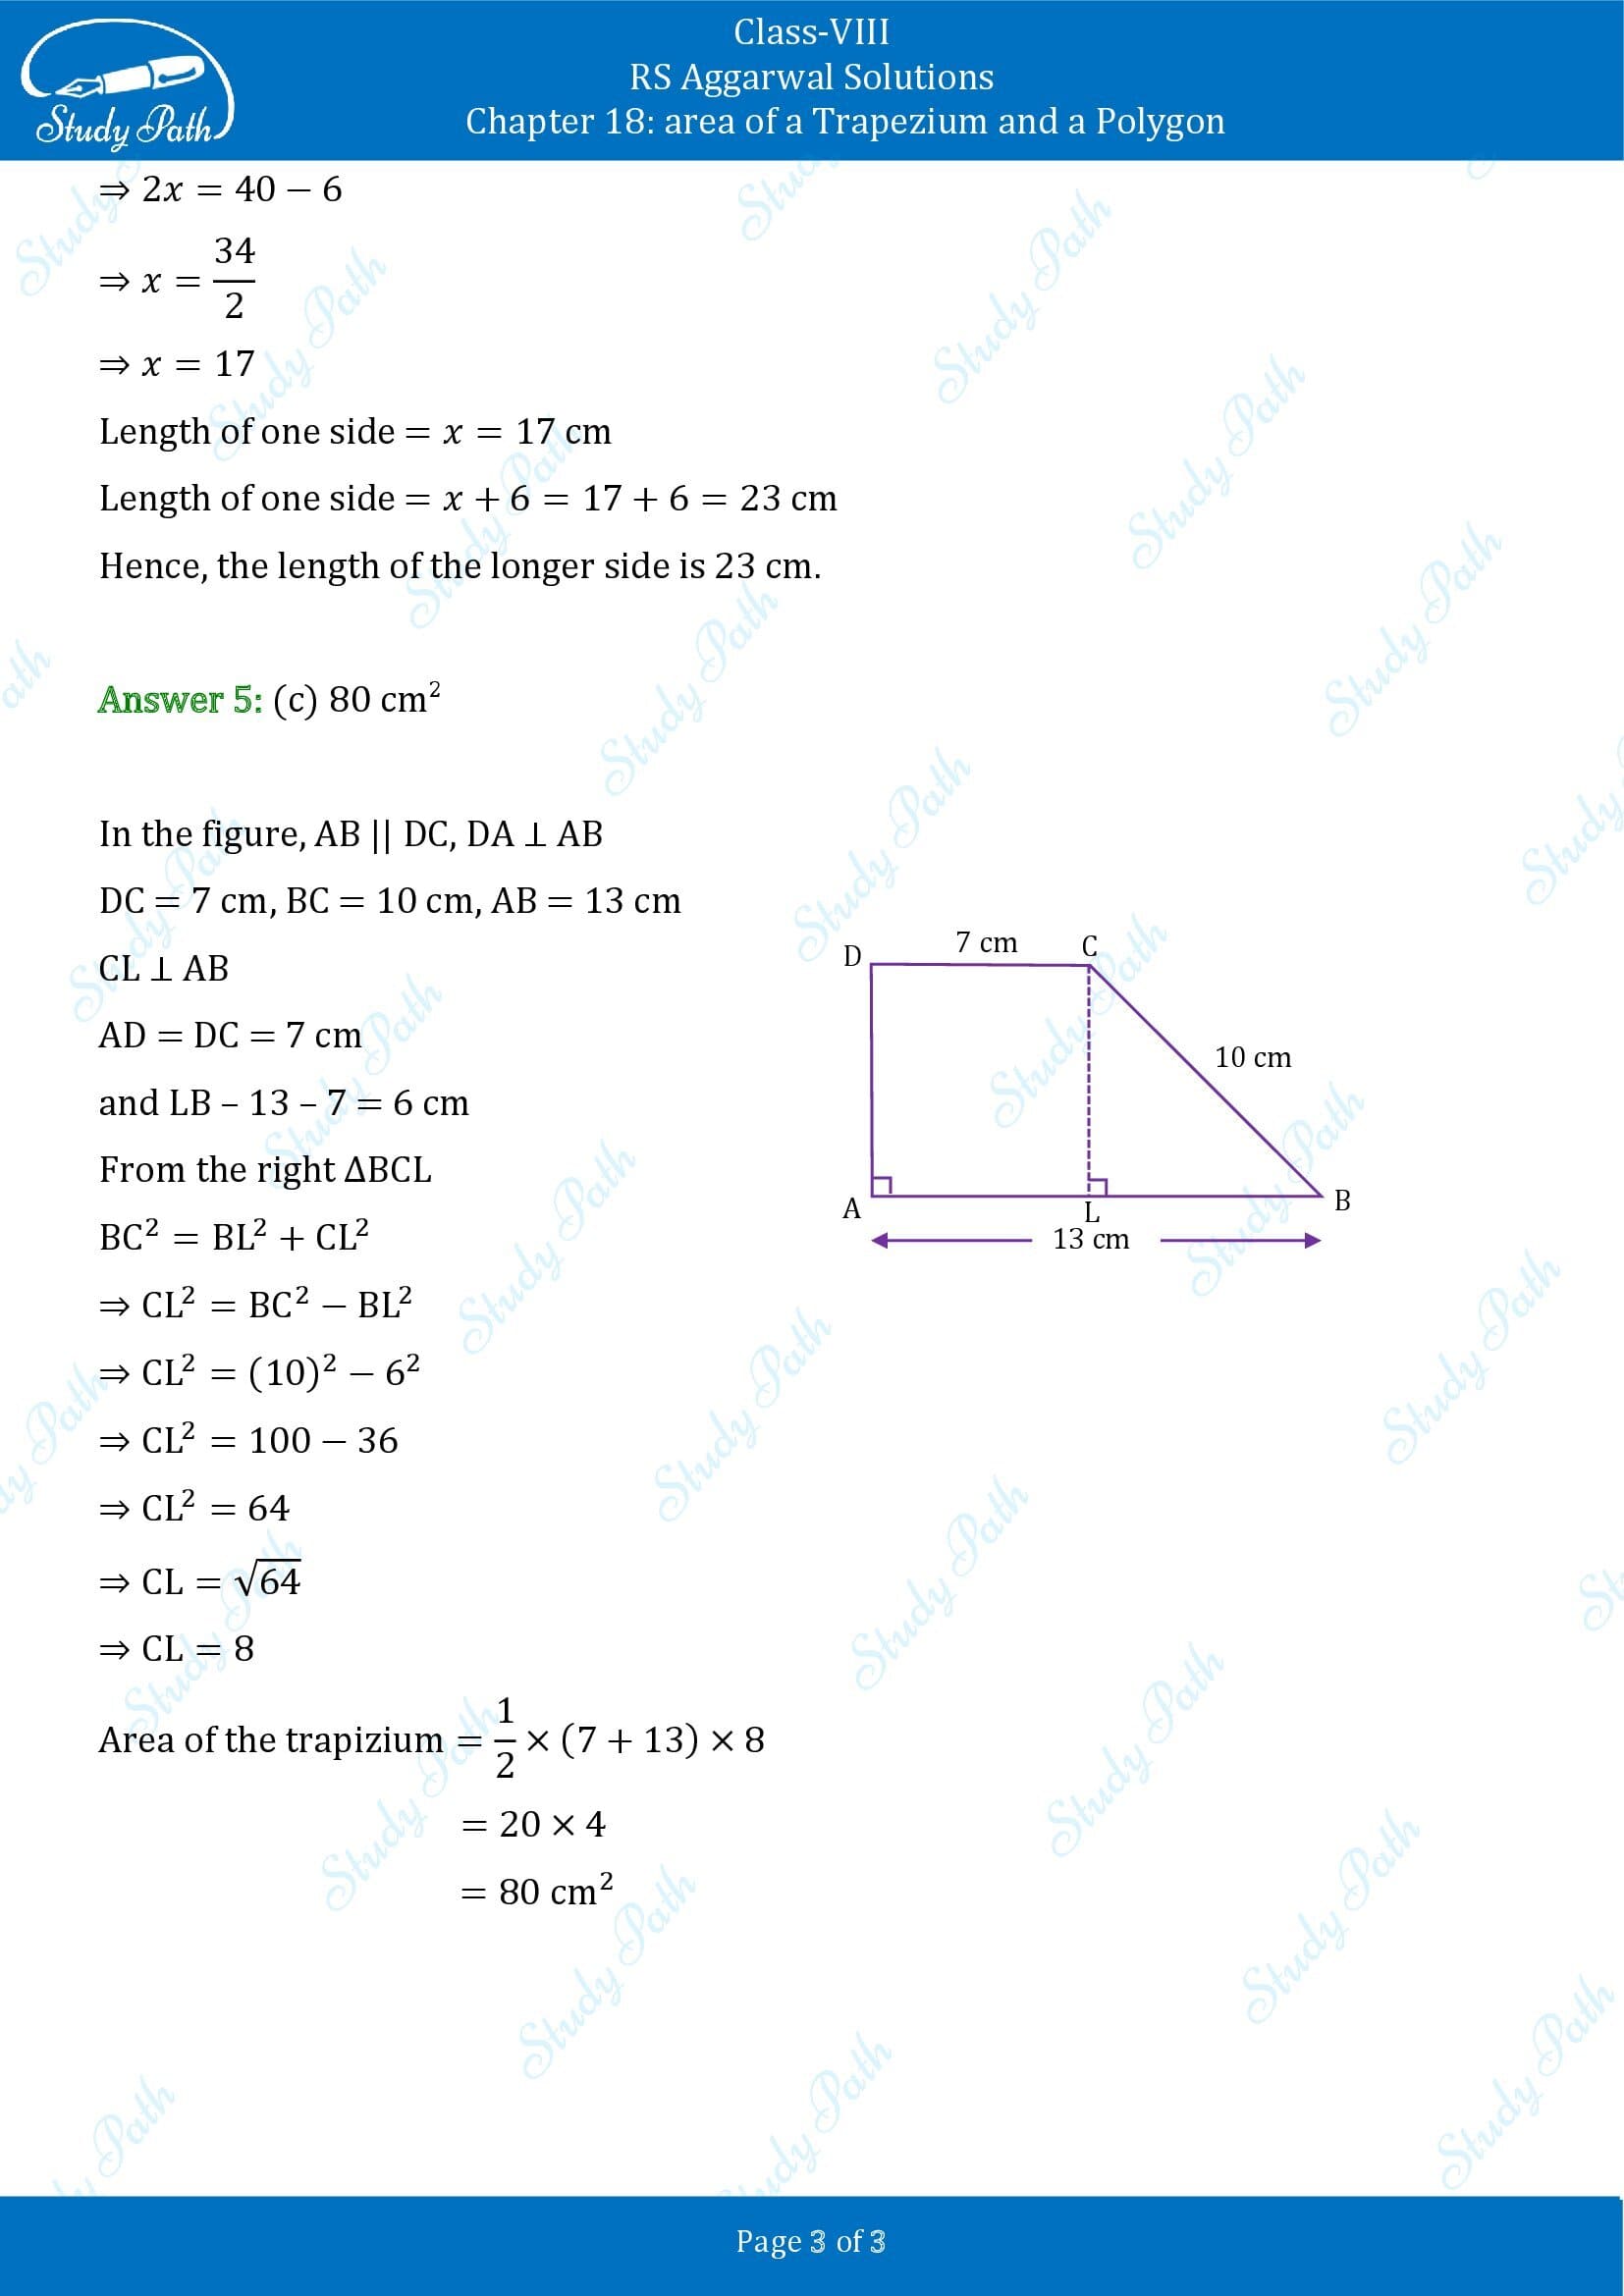 RS Aggarwal Solutions Class 8 Chapter 18 Area of a Trapezium and a Polygon Exercise 18C MCQs 00003